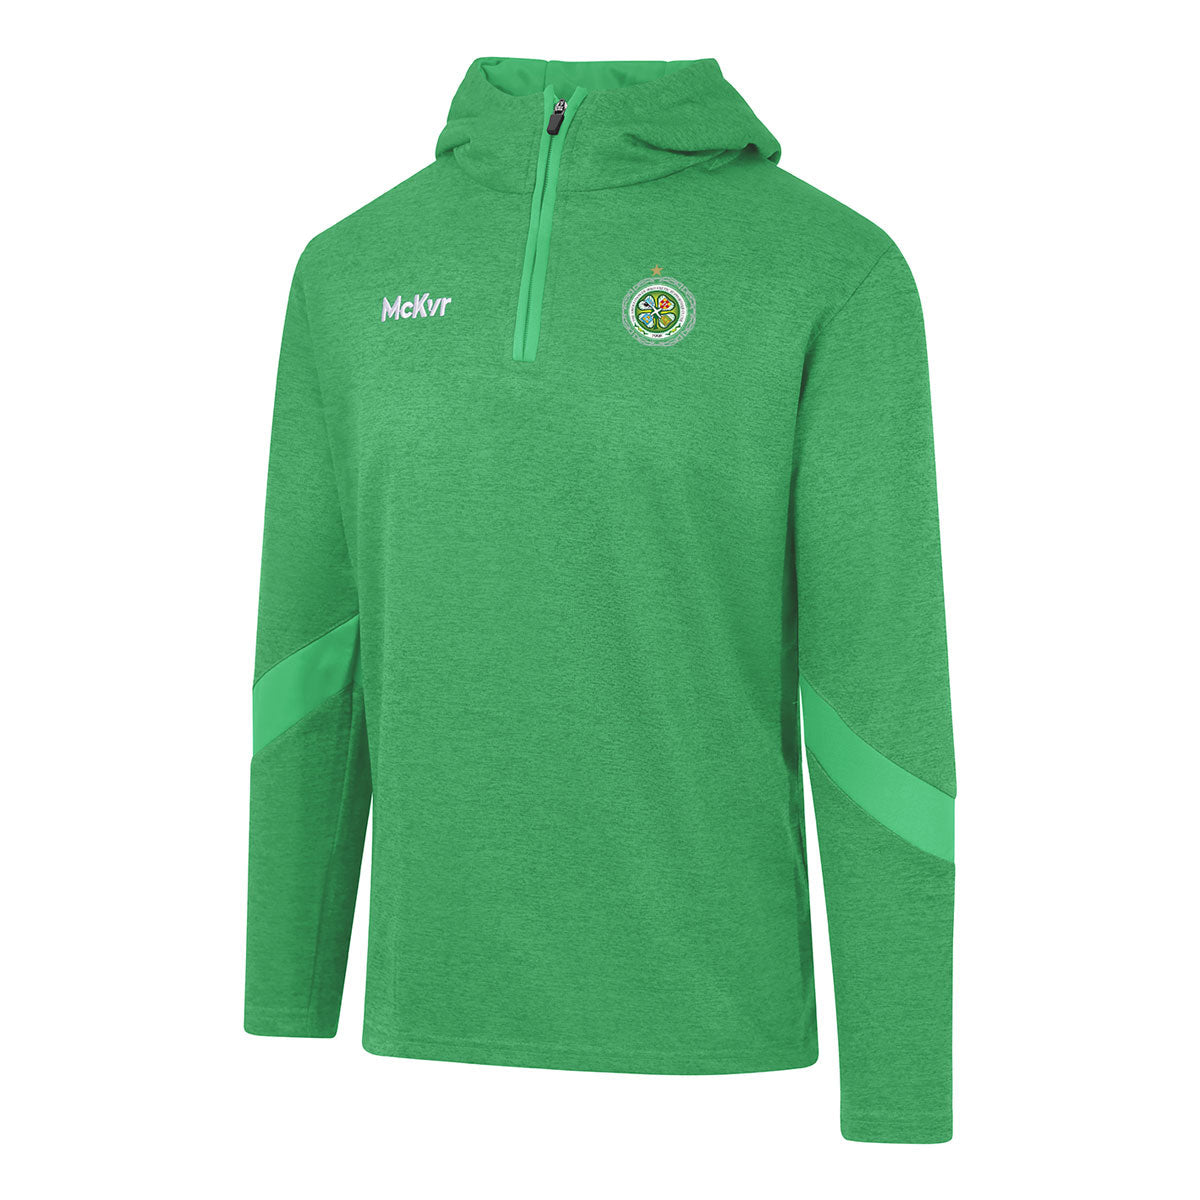 Mc Keever The Association of Irish Celtic Supporters Clubs Core 22 1/4 Zip Hoodie - Youth - Green